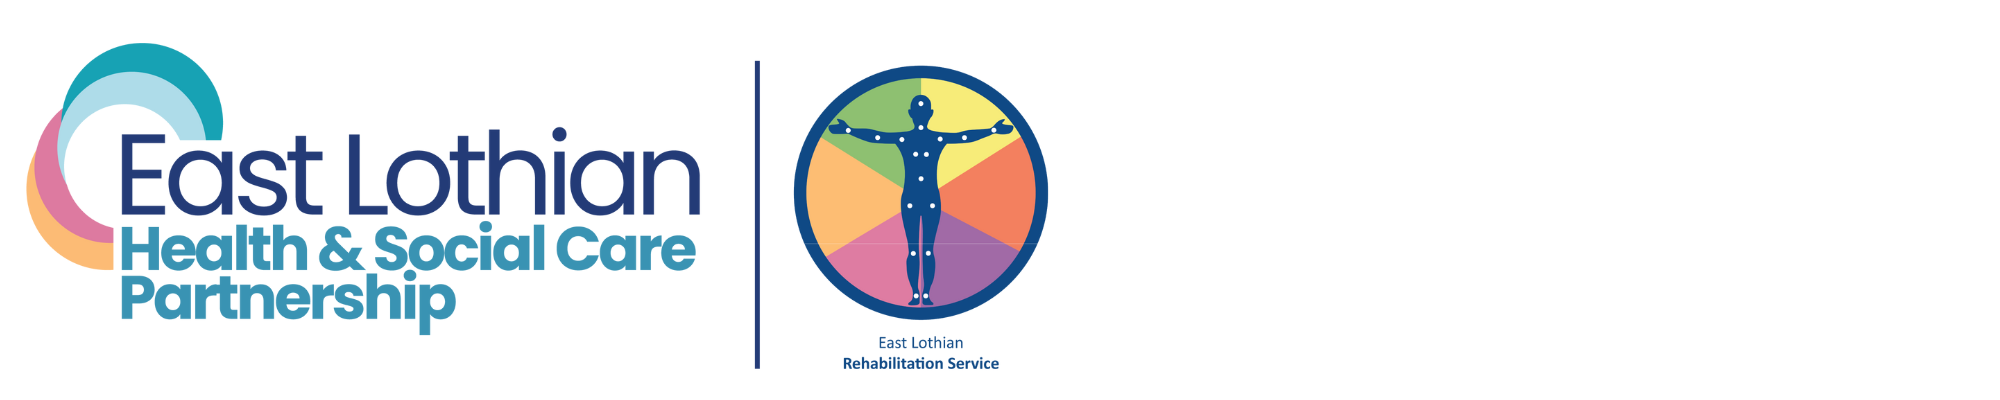 Image of the East Lothian Health and Social Care Partnership and Rehabilitation Service logos